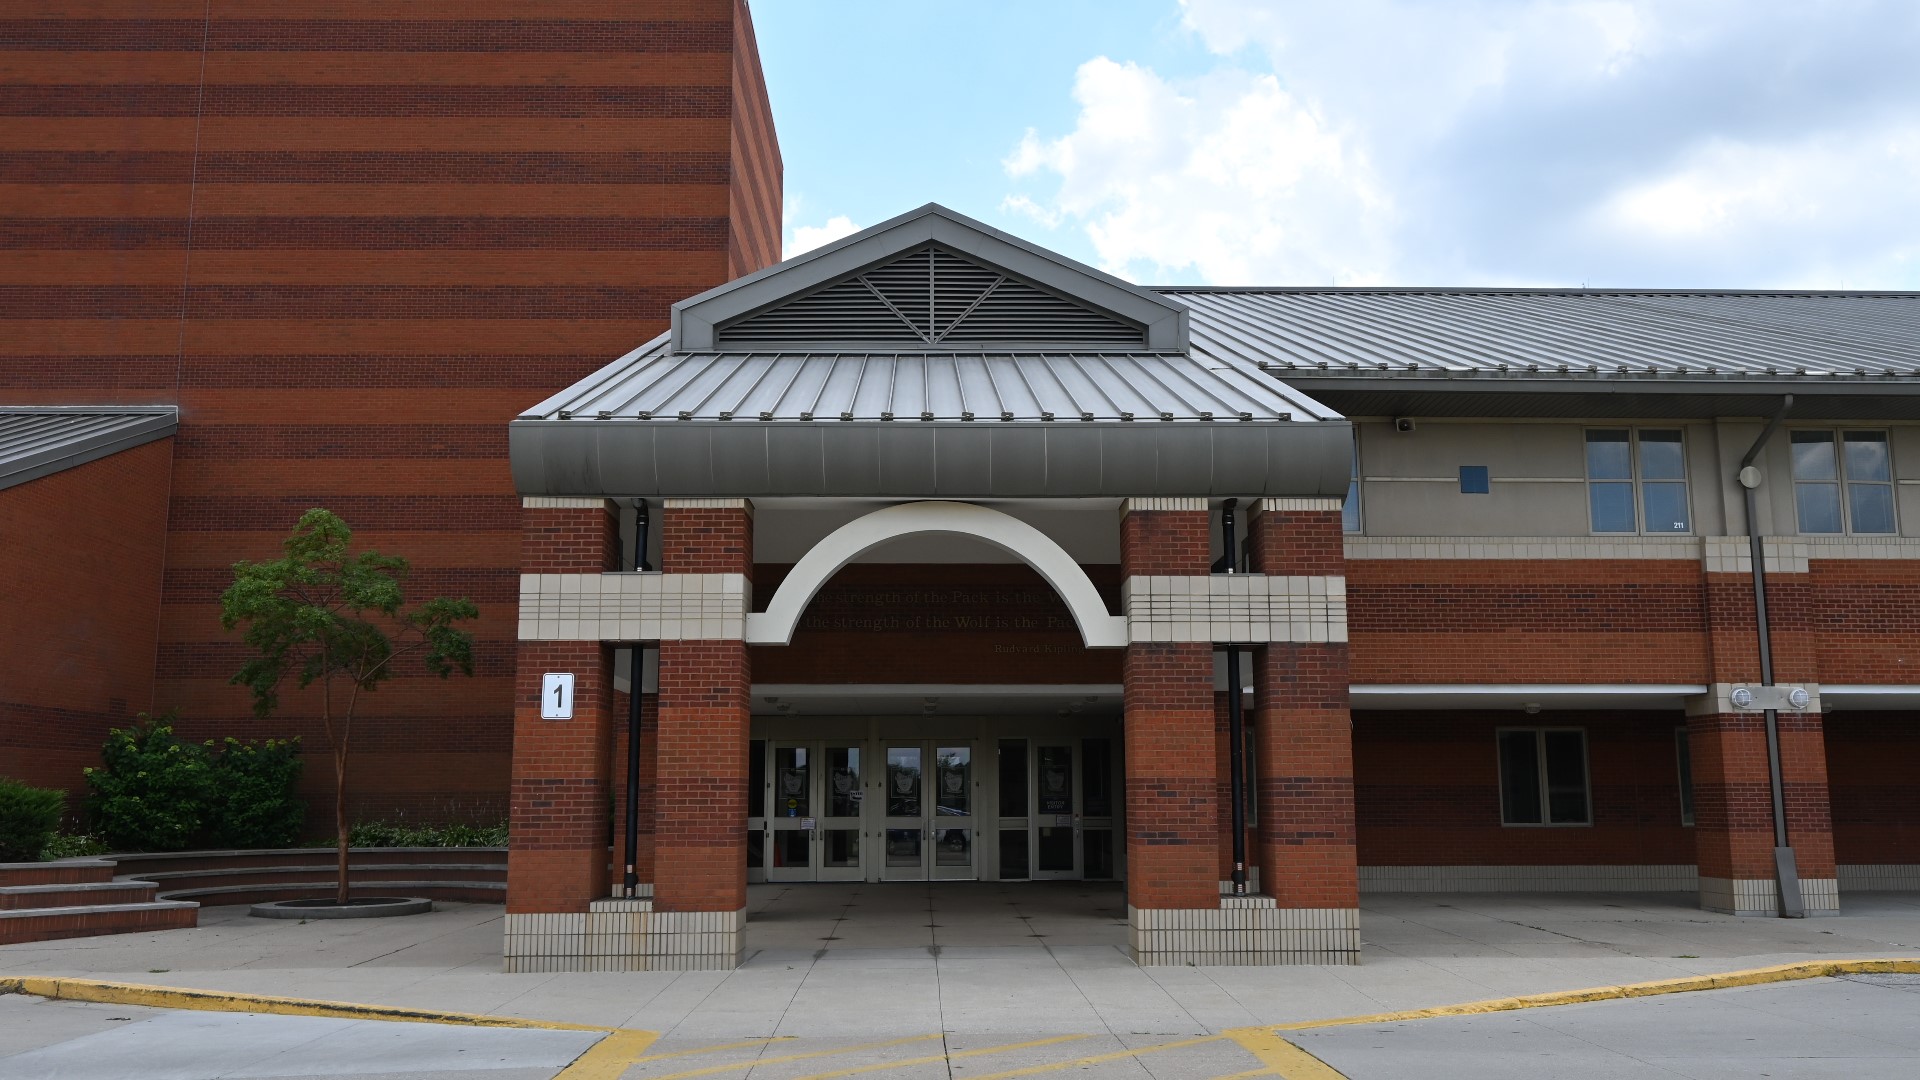 A spokesperson with the Columbus Division of Police said a staff member received a threat electronically and the threat identified the school.